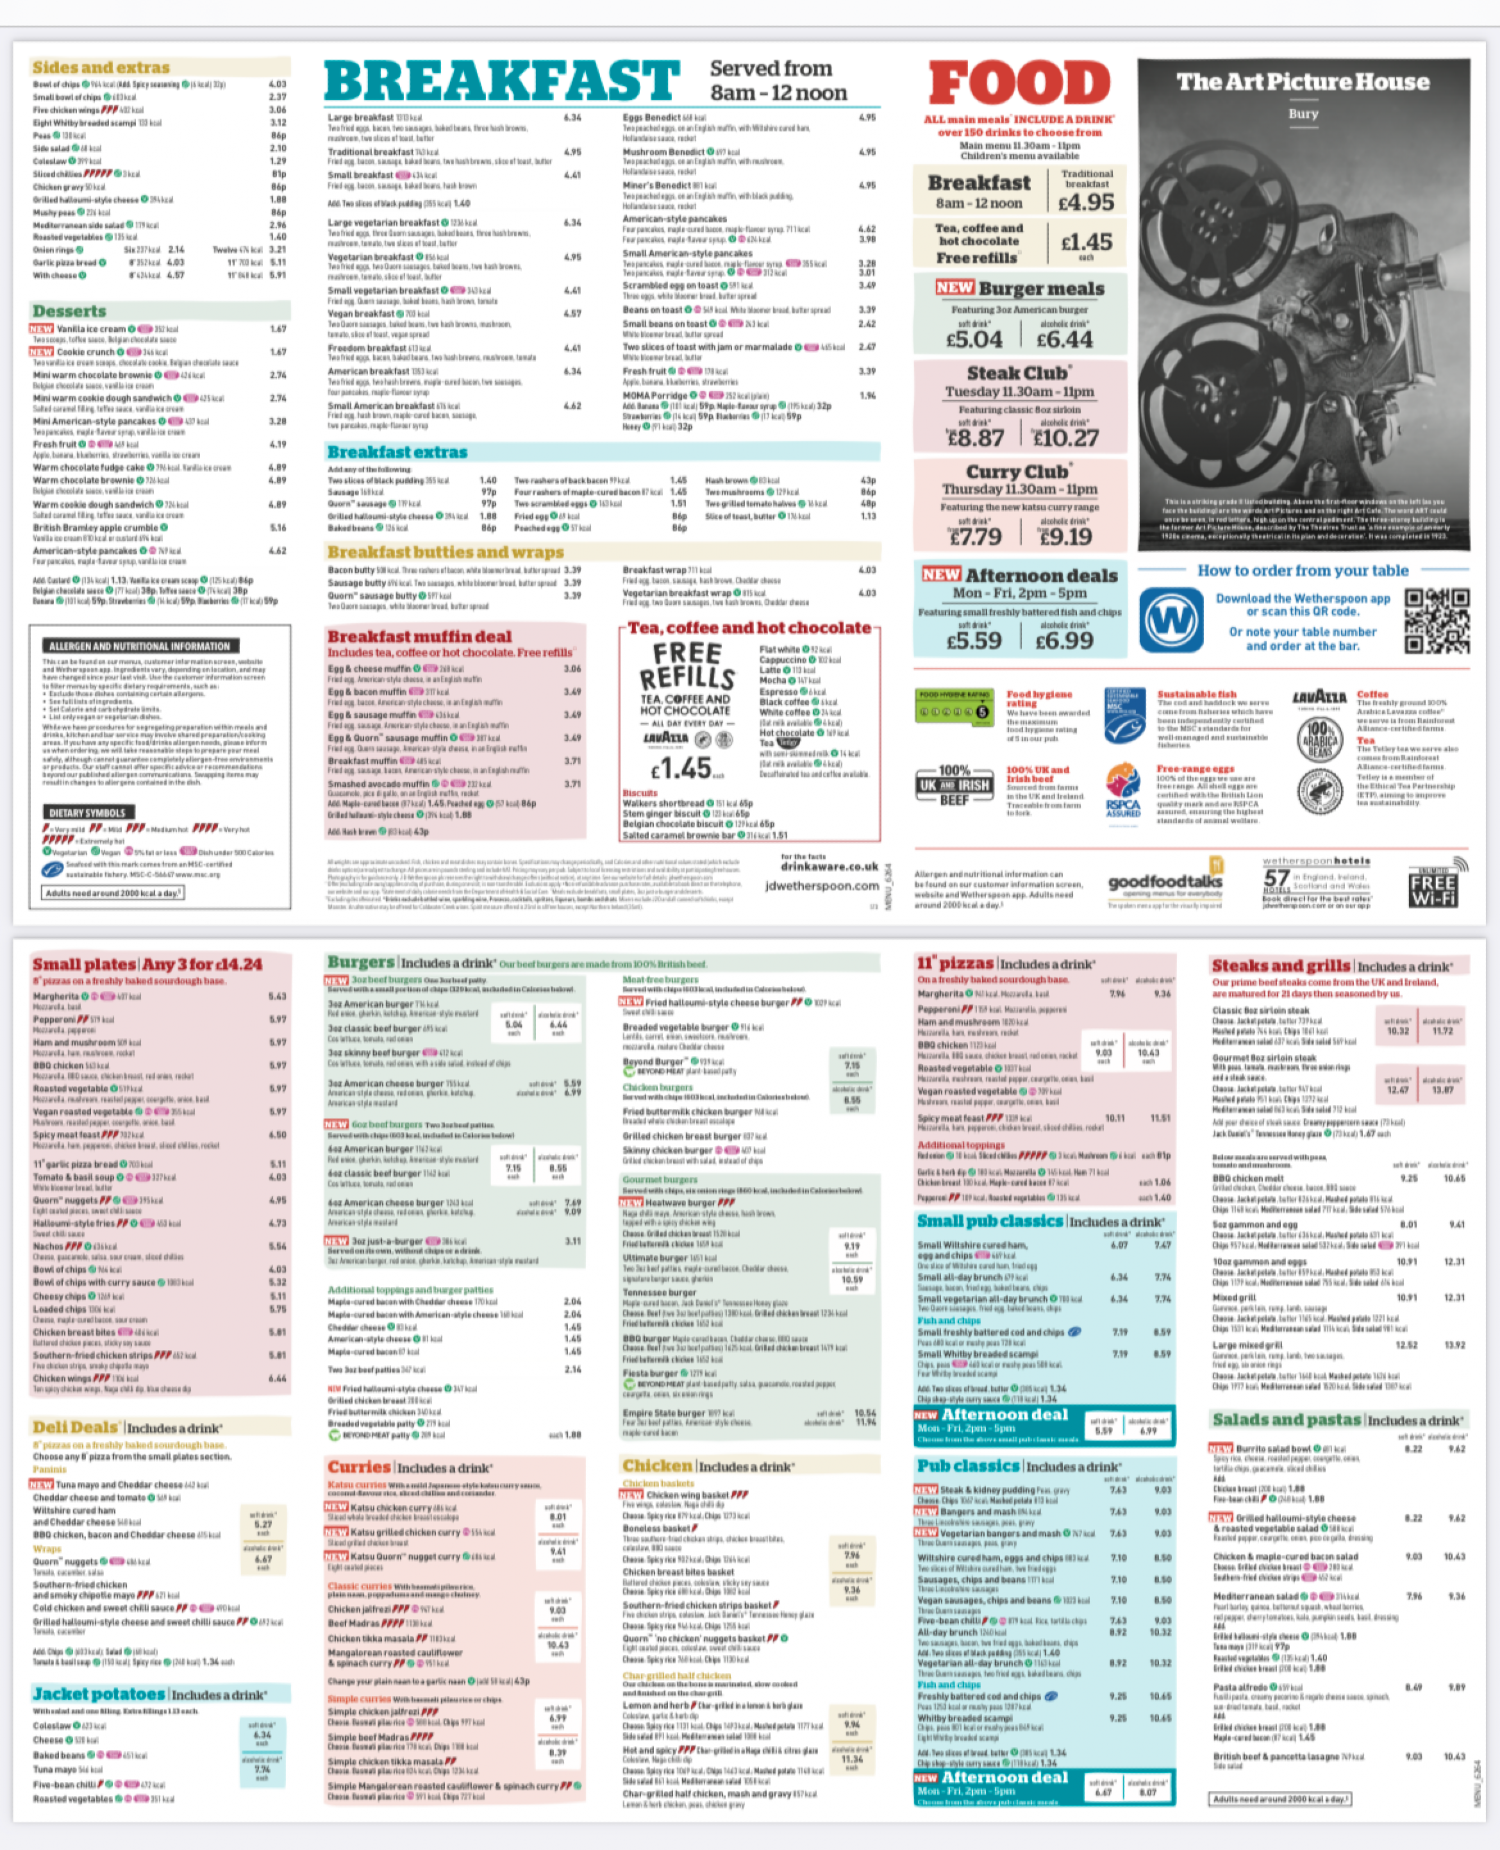 Takeaway Restaurant Menu Page - Wetherspoons – The Art Picturehouse - Bury